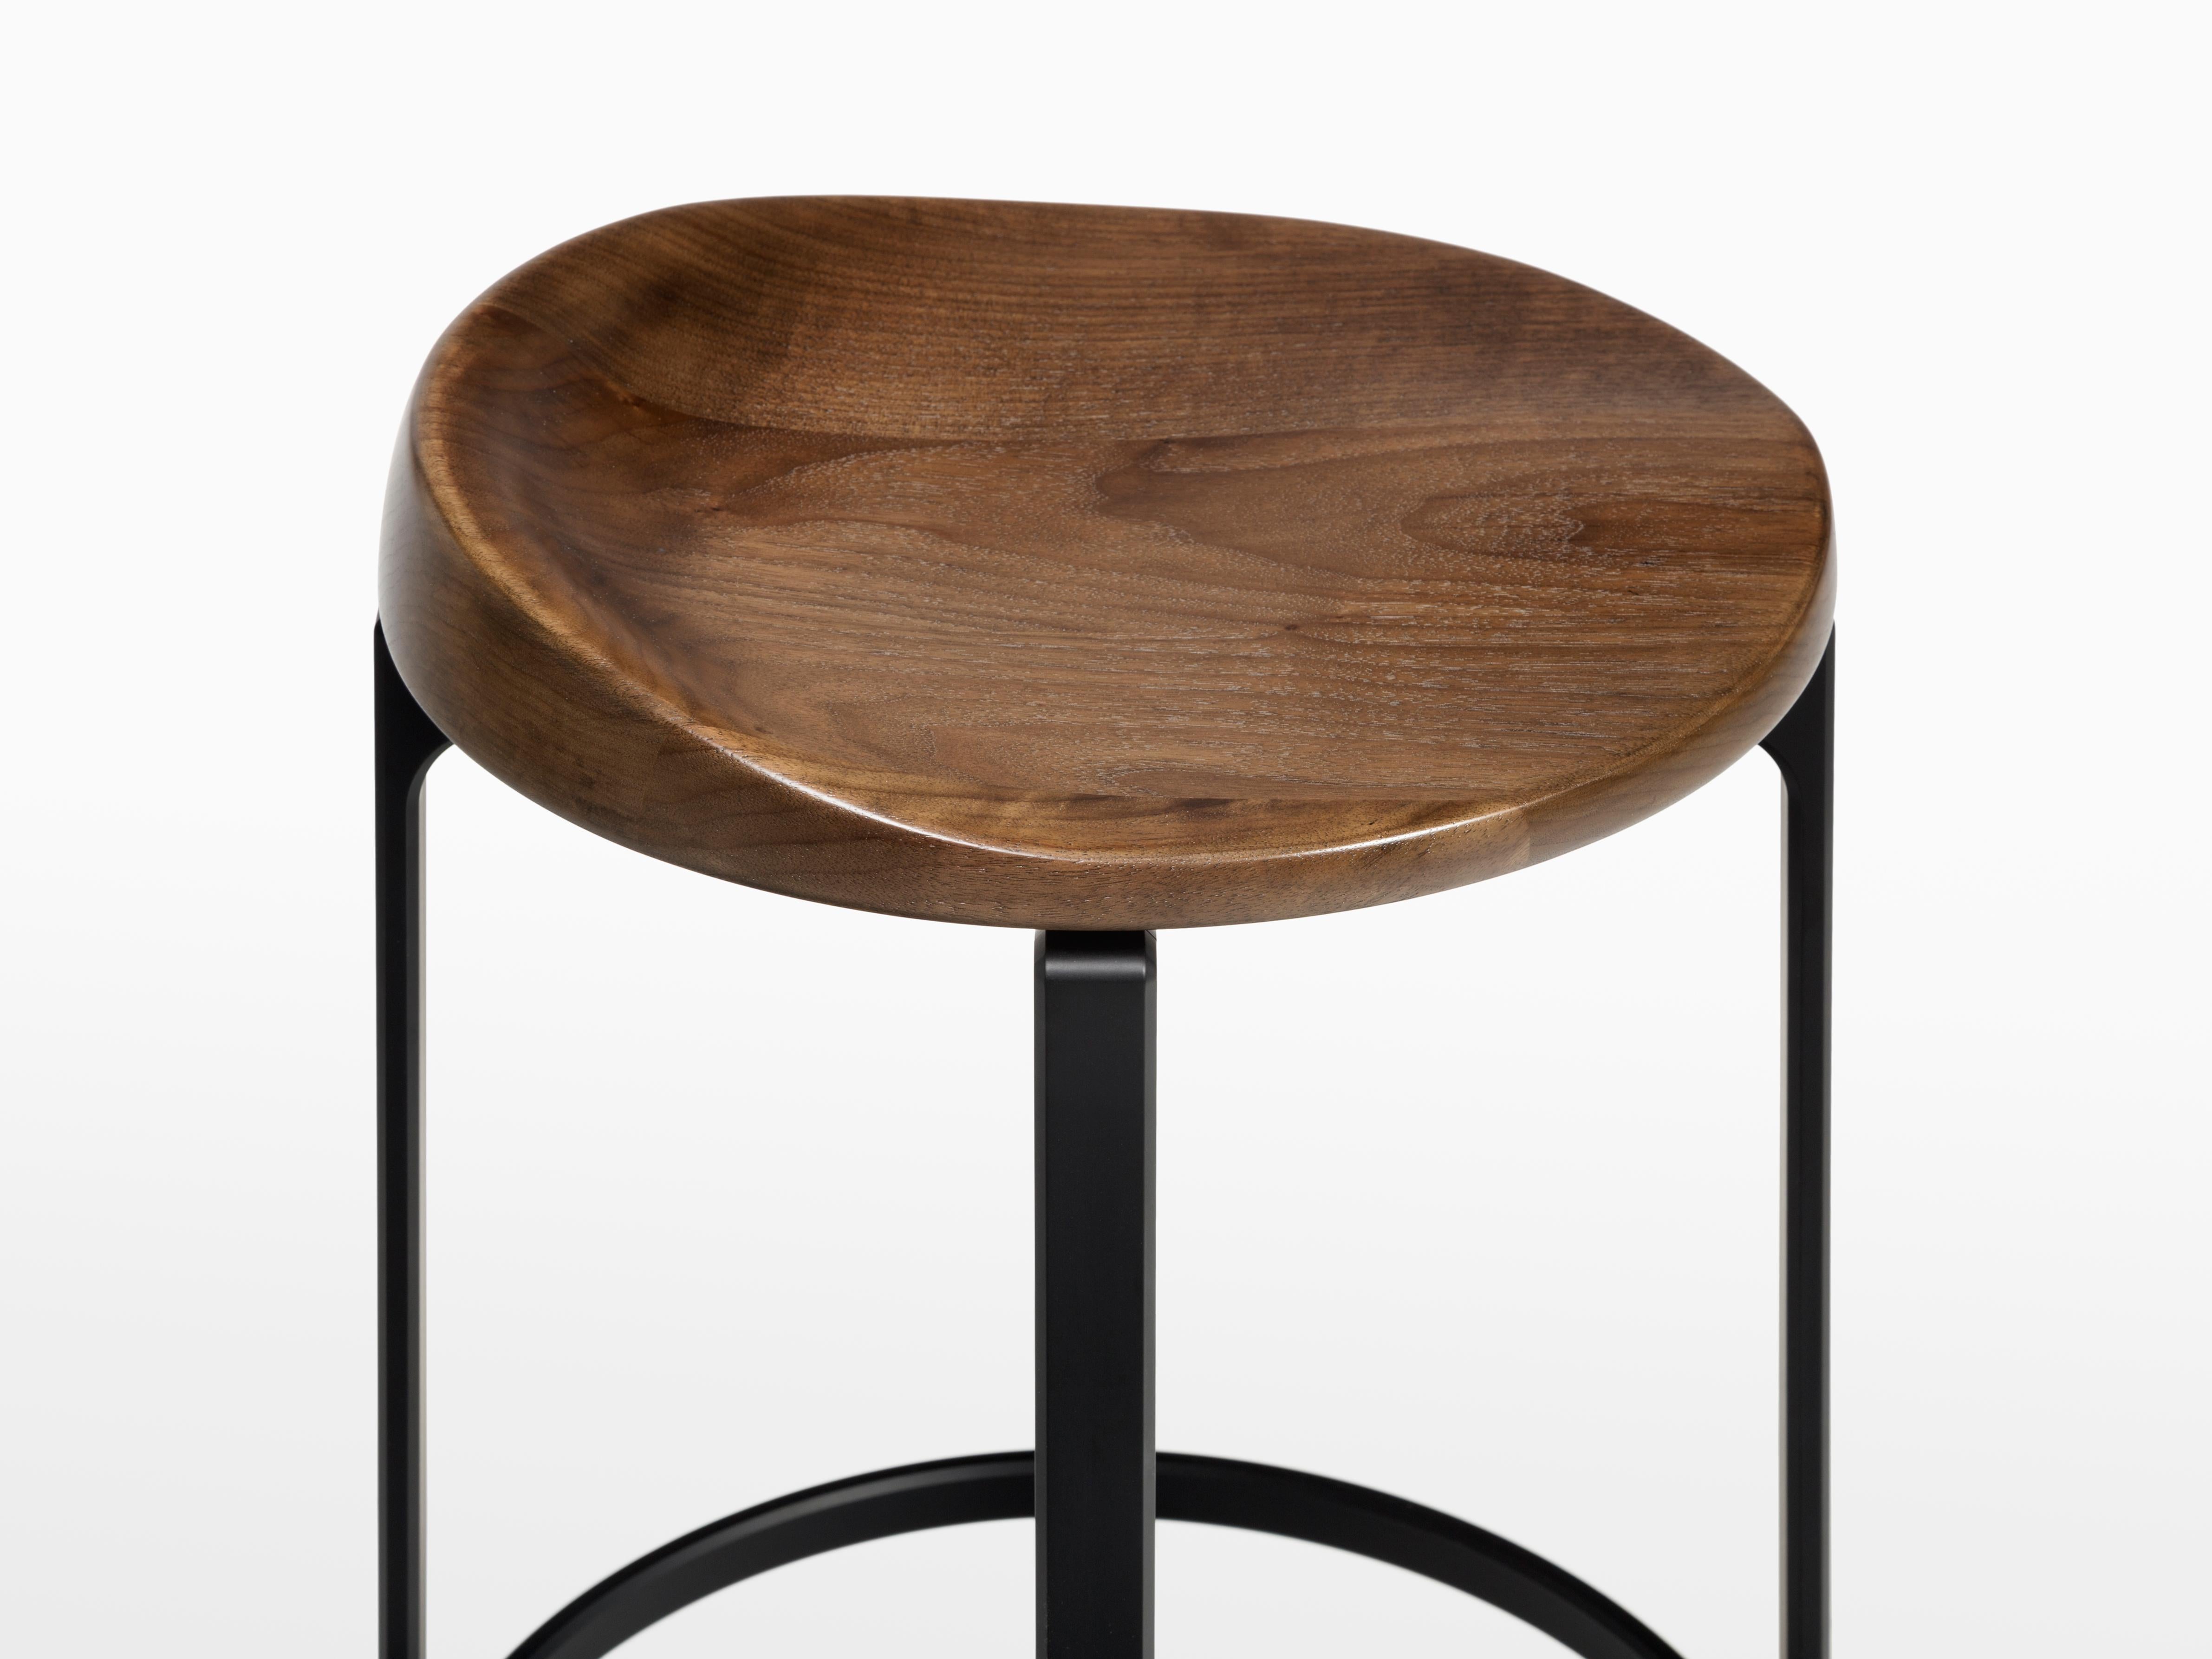 HOLLY HUNT Pepper counter stool with walnut cinder seat and aluminum frame. Unusual yet innovative, the Pepper Counter stool design was inspired by the sectioned appearance of a sliced bell pepper. Advanced aluminum crafting techniques were used to